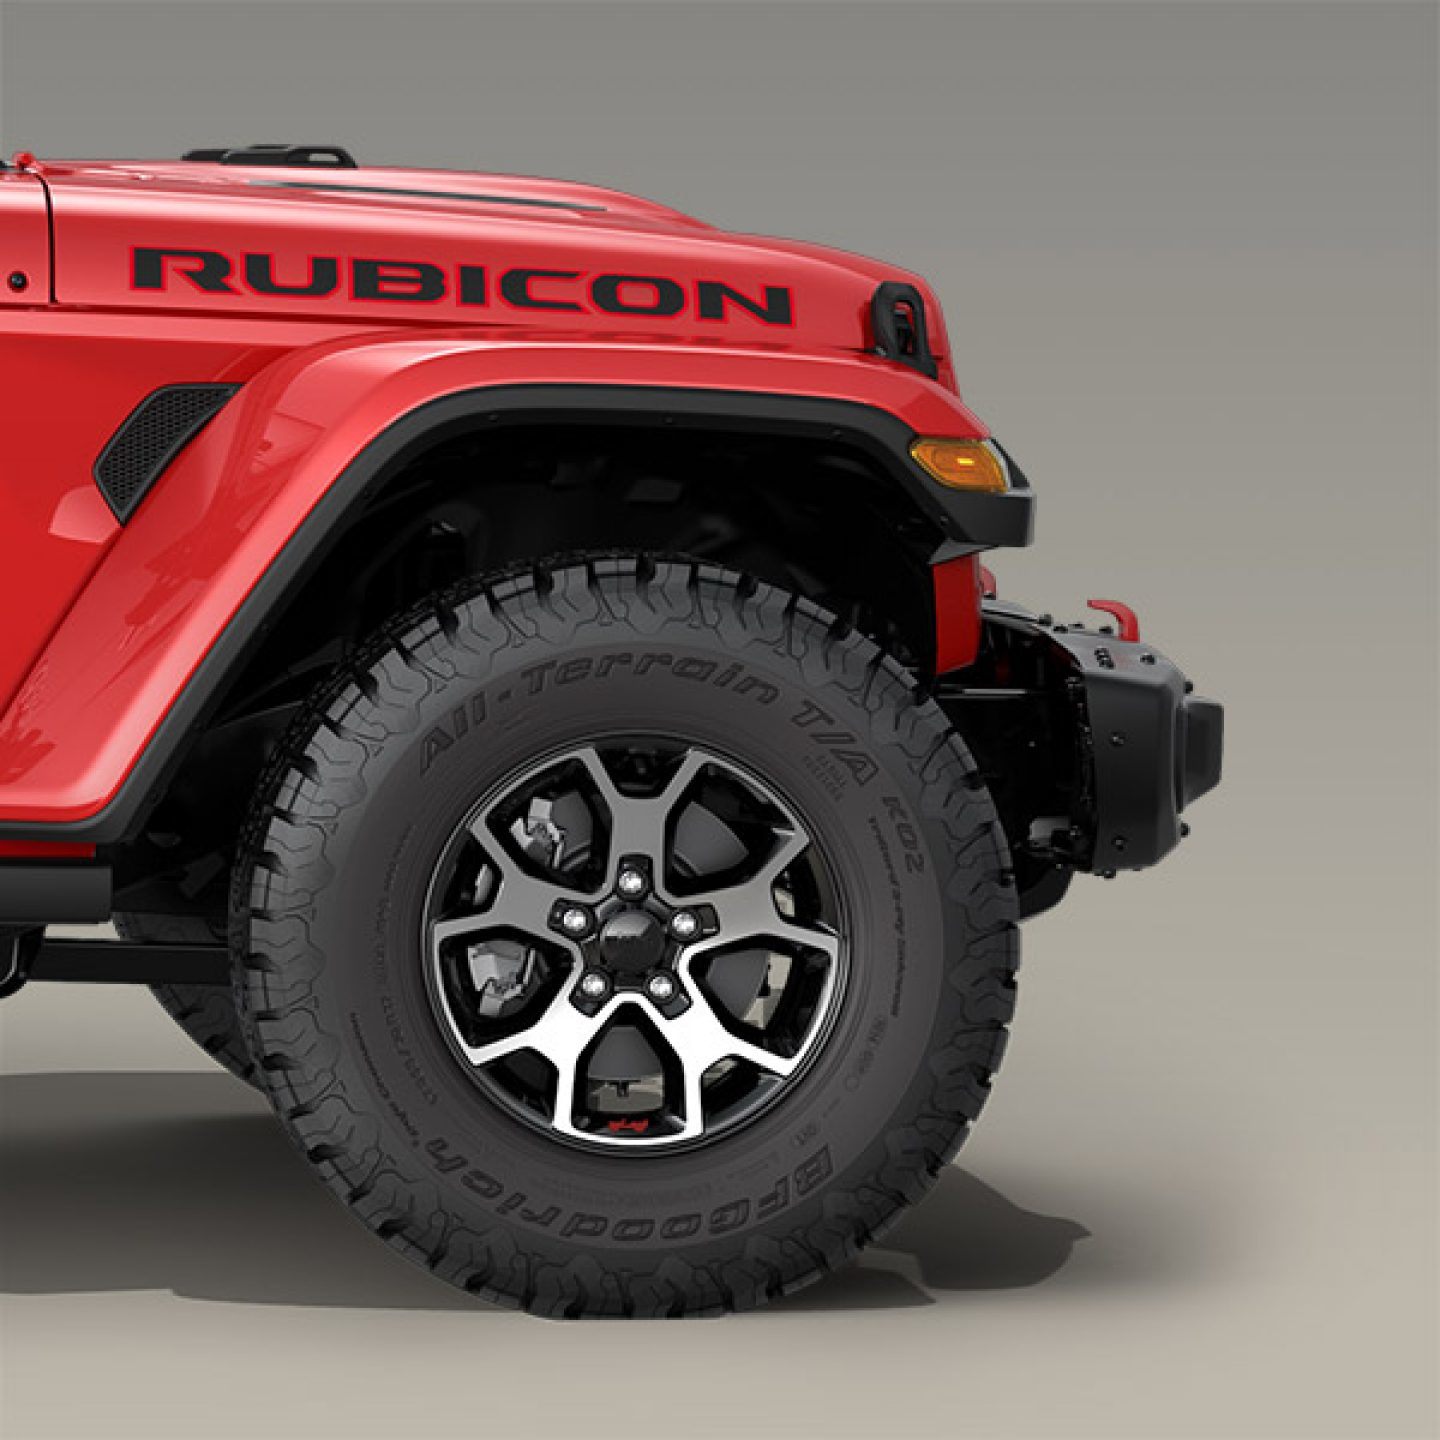 2018-Jeep-Wrangler-JL-VLP-Modelizer-Key-Features-Rubicon-33-Inch .1440 - Military AutoSource